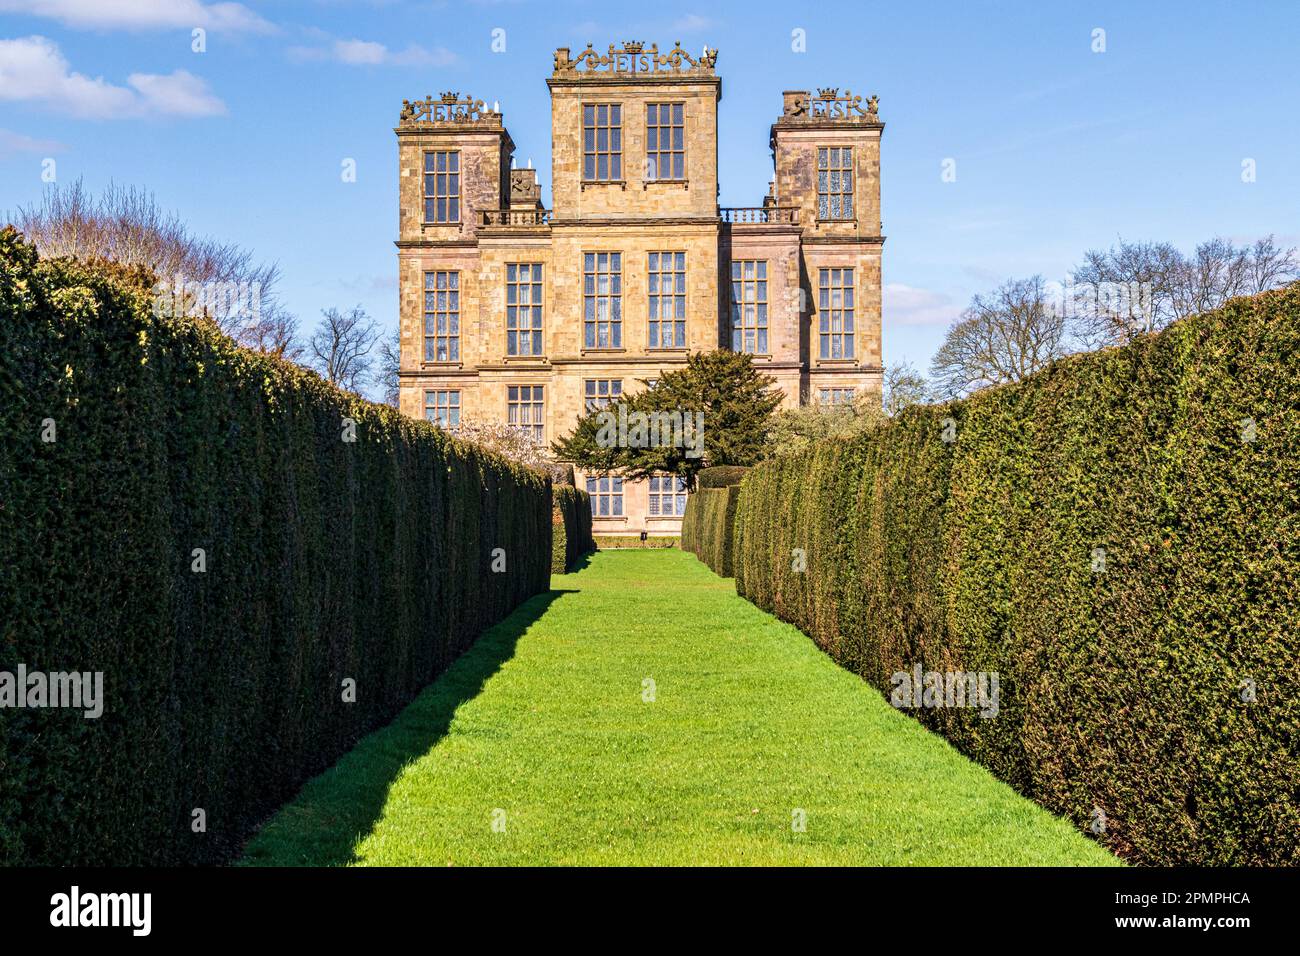 Hardwick Hall - an Elizabethan house built by Bess of Hardwick in the 1590s, Derbyshire, England UK Stock Photo